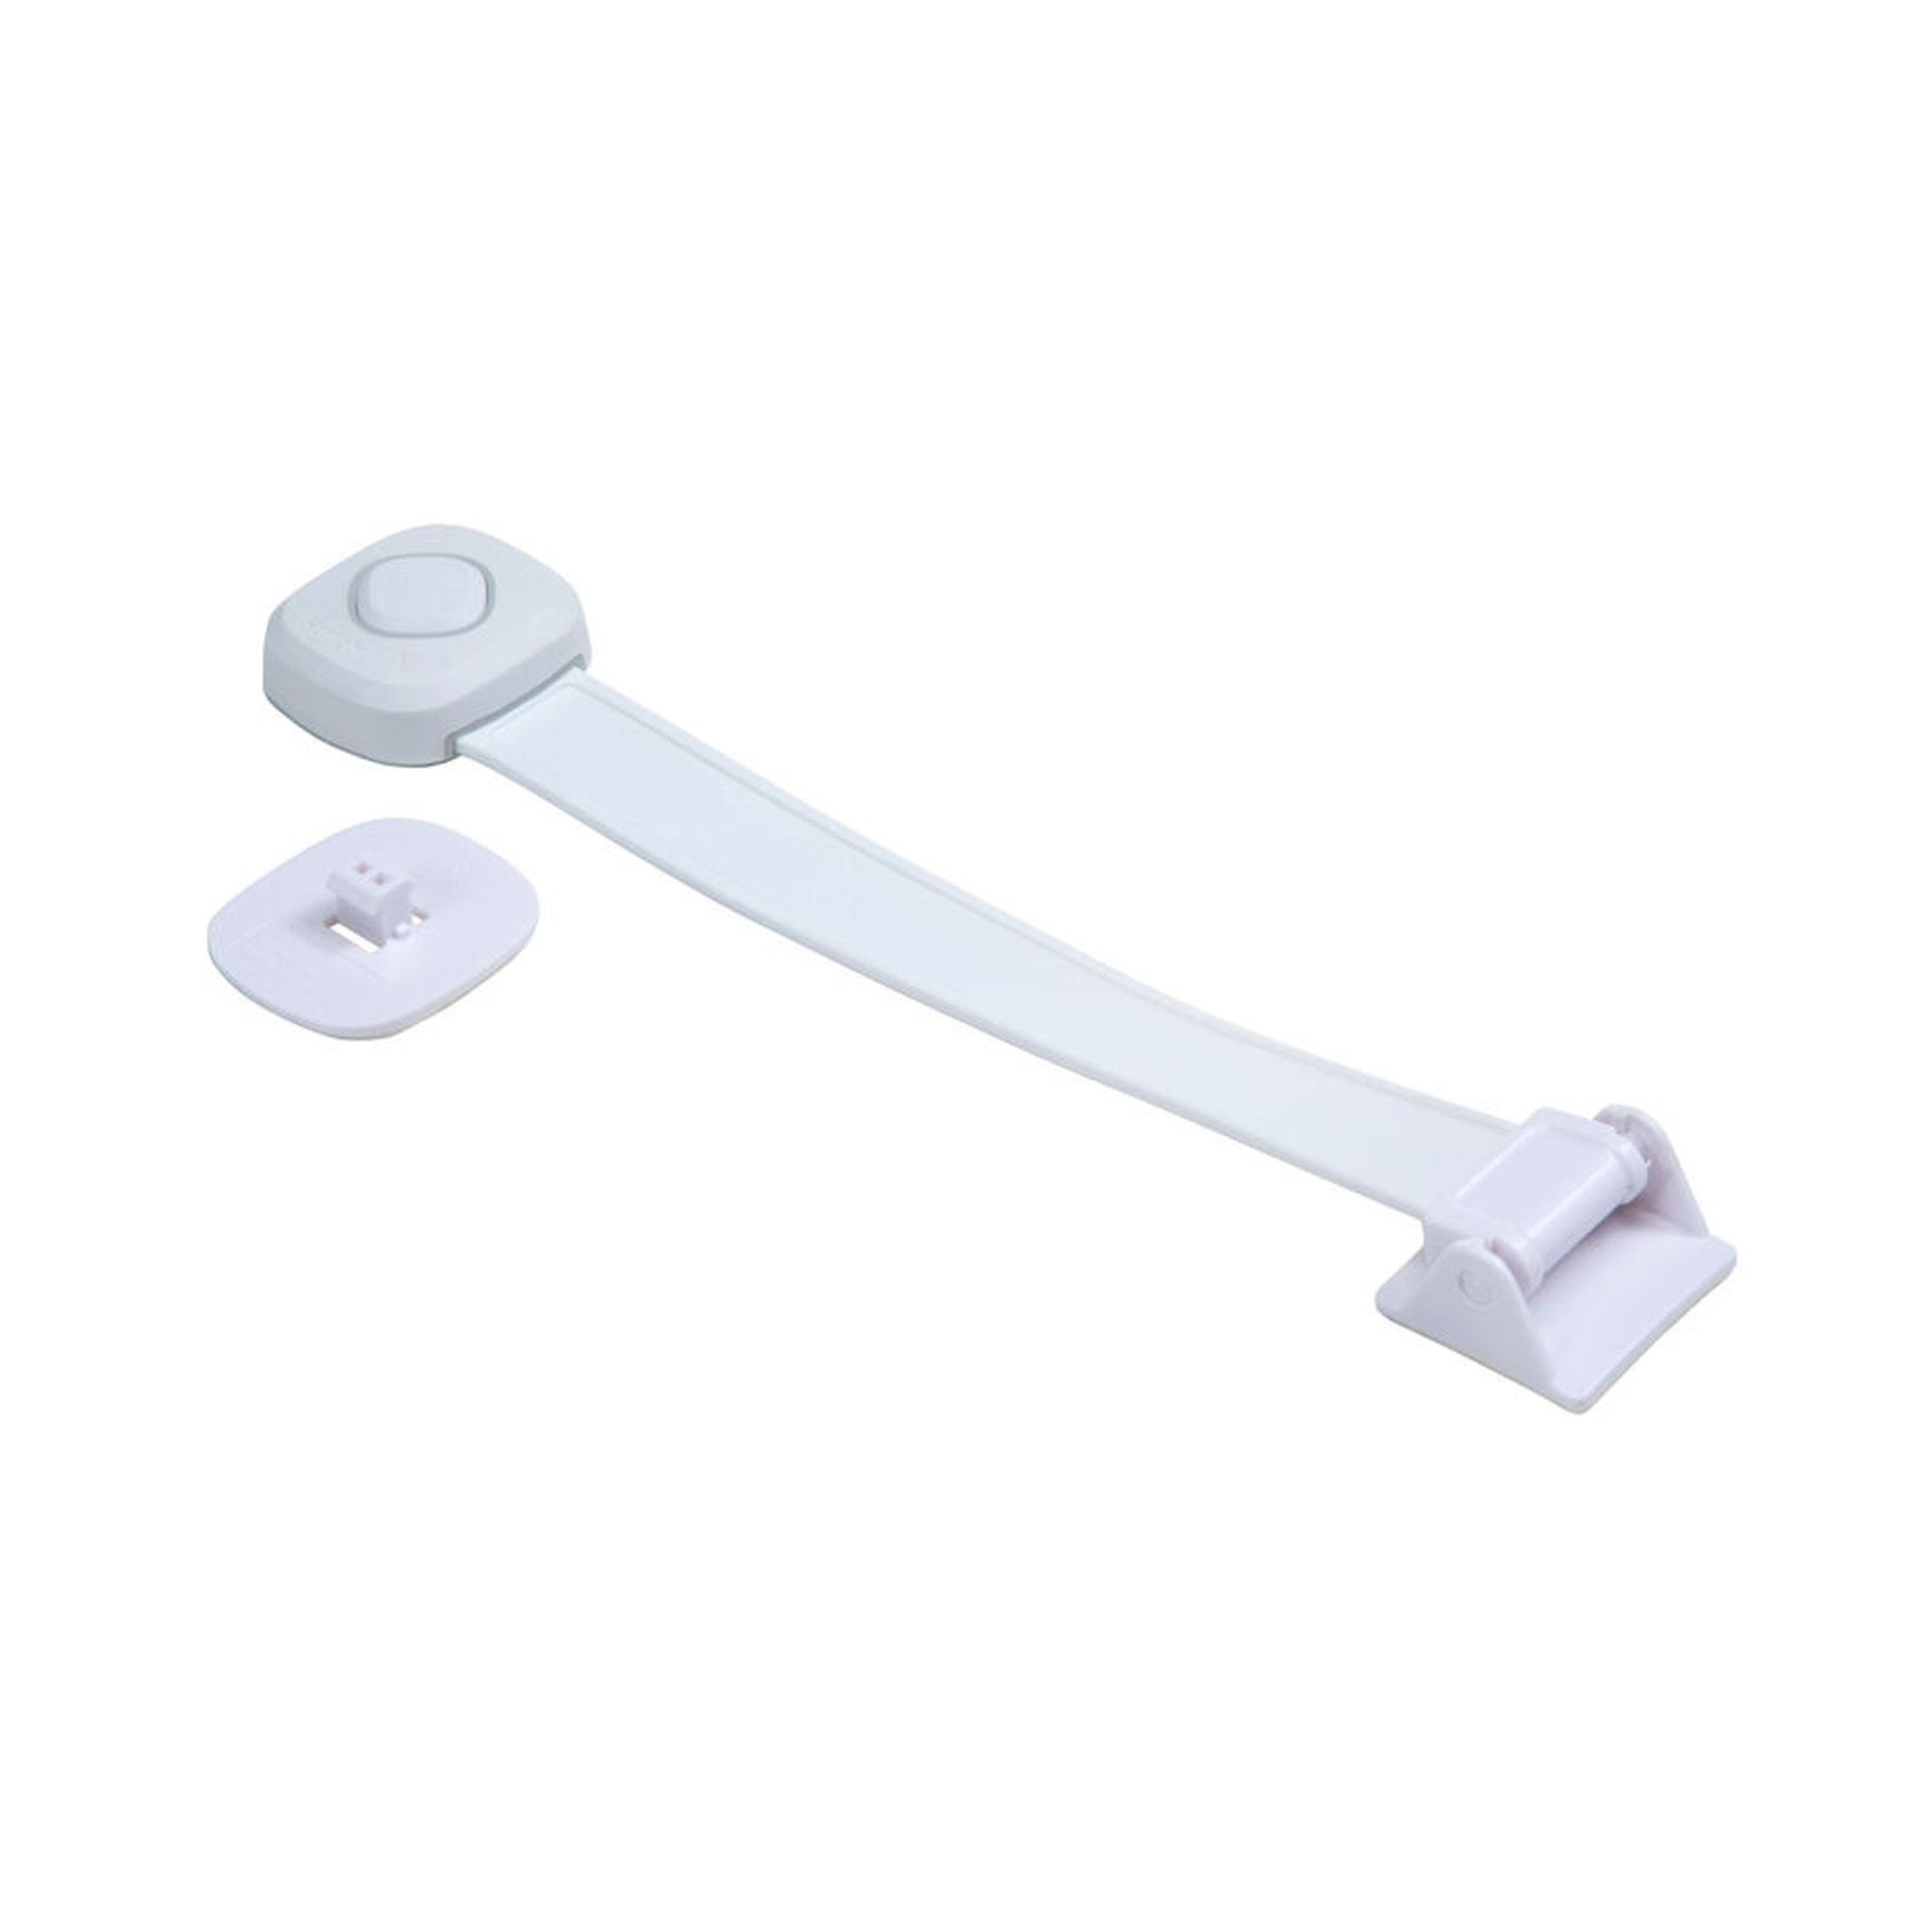 Outsmart Toilet Lock with Decoy Button from SAFETY 1ST | BMR